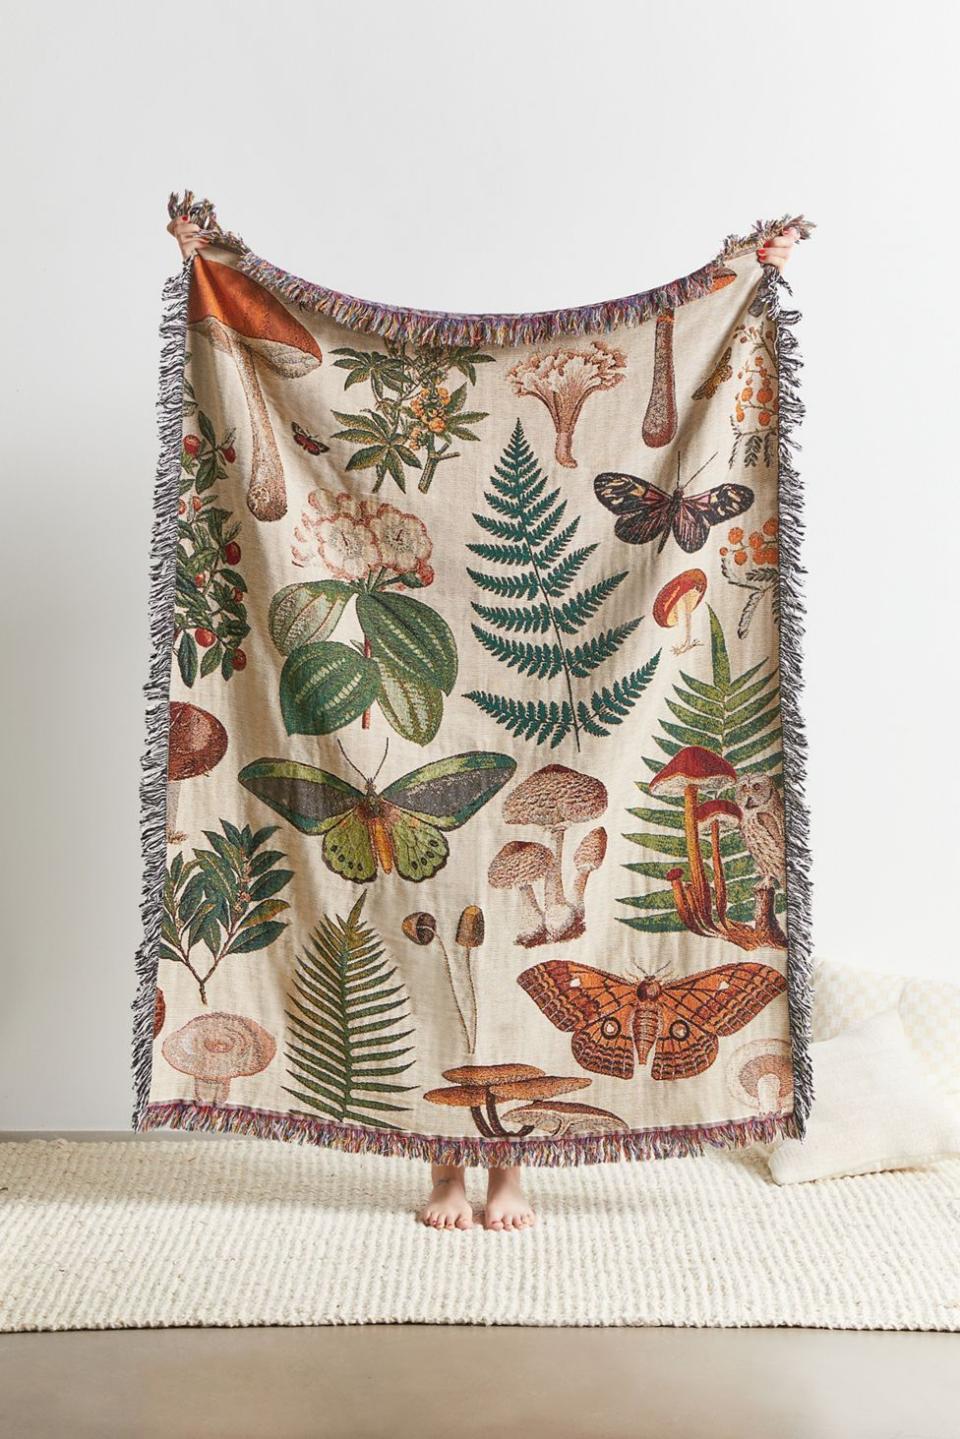 4) Valley Cruise Press Fantastic Forest Throw Blanket